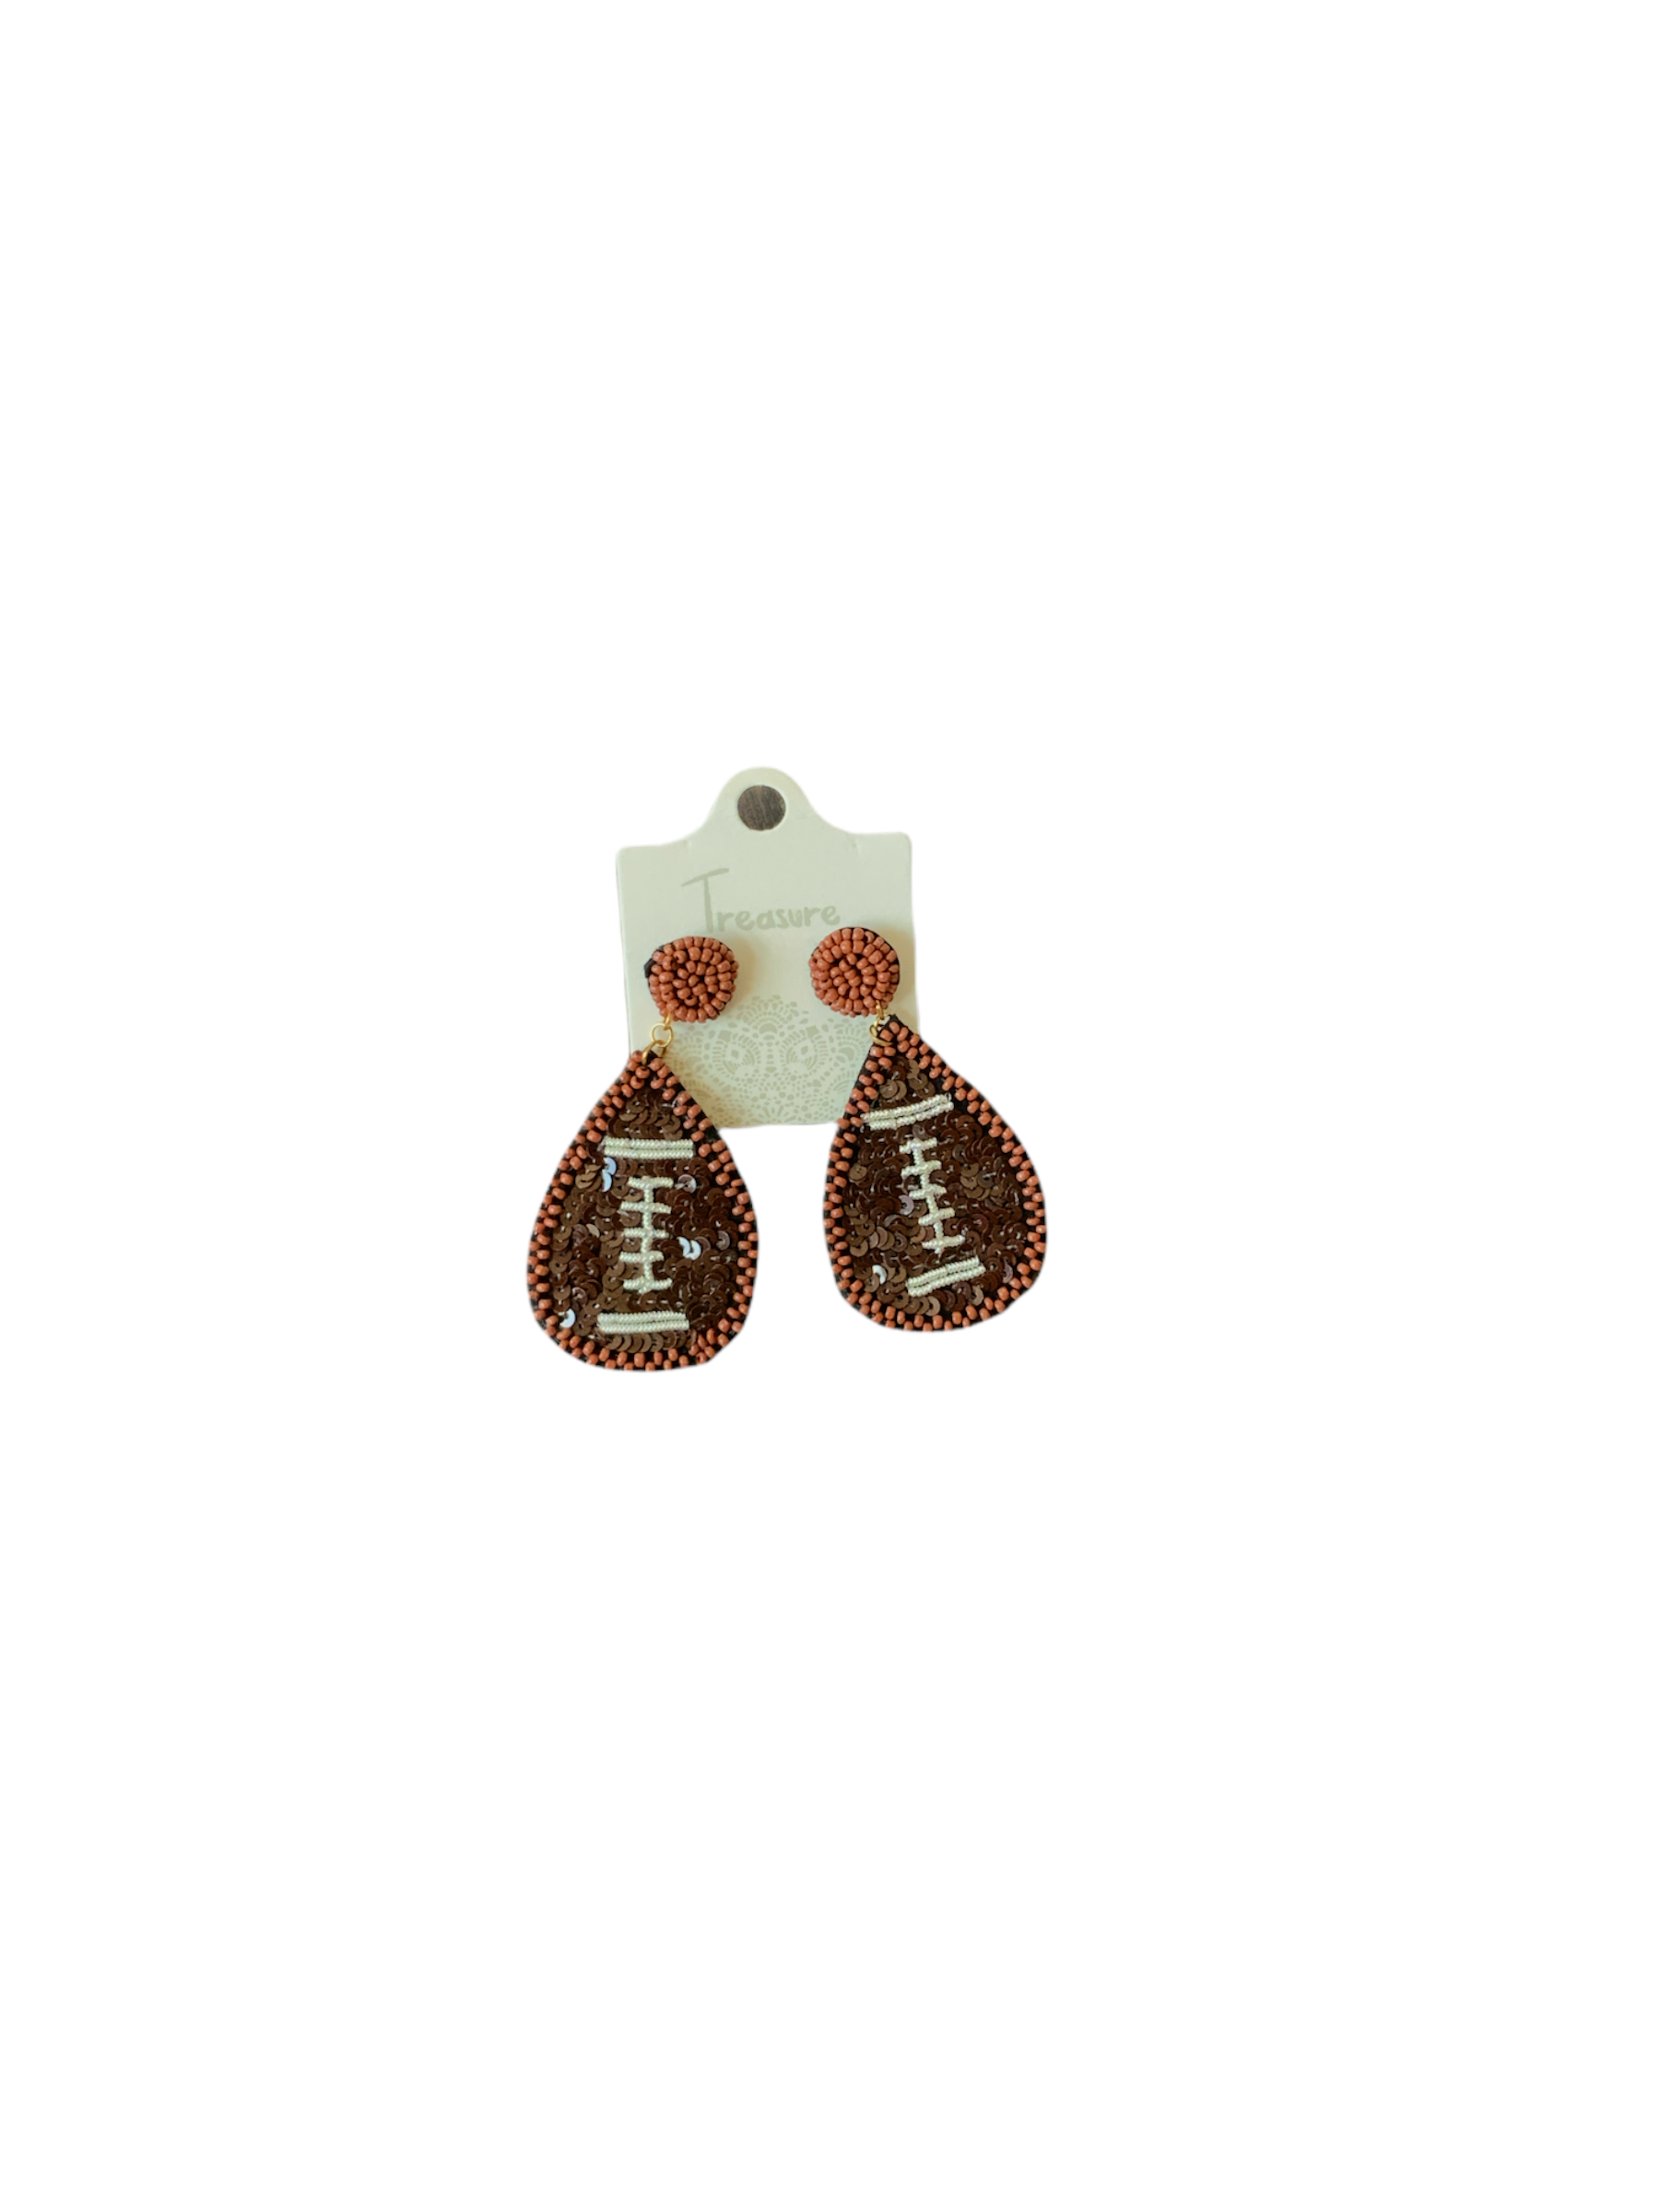 FOOTBALL EARRINGS - Baby Bums Clothing 